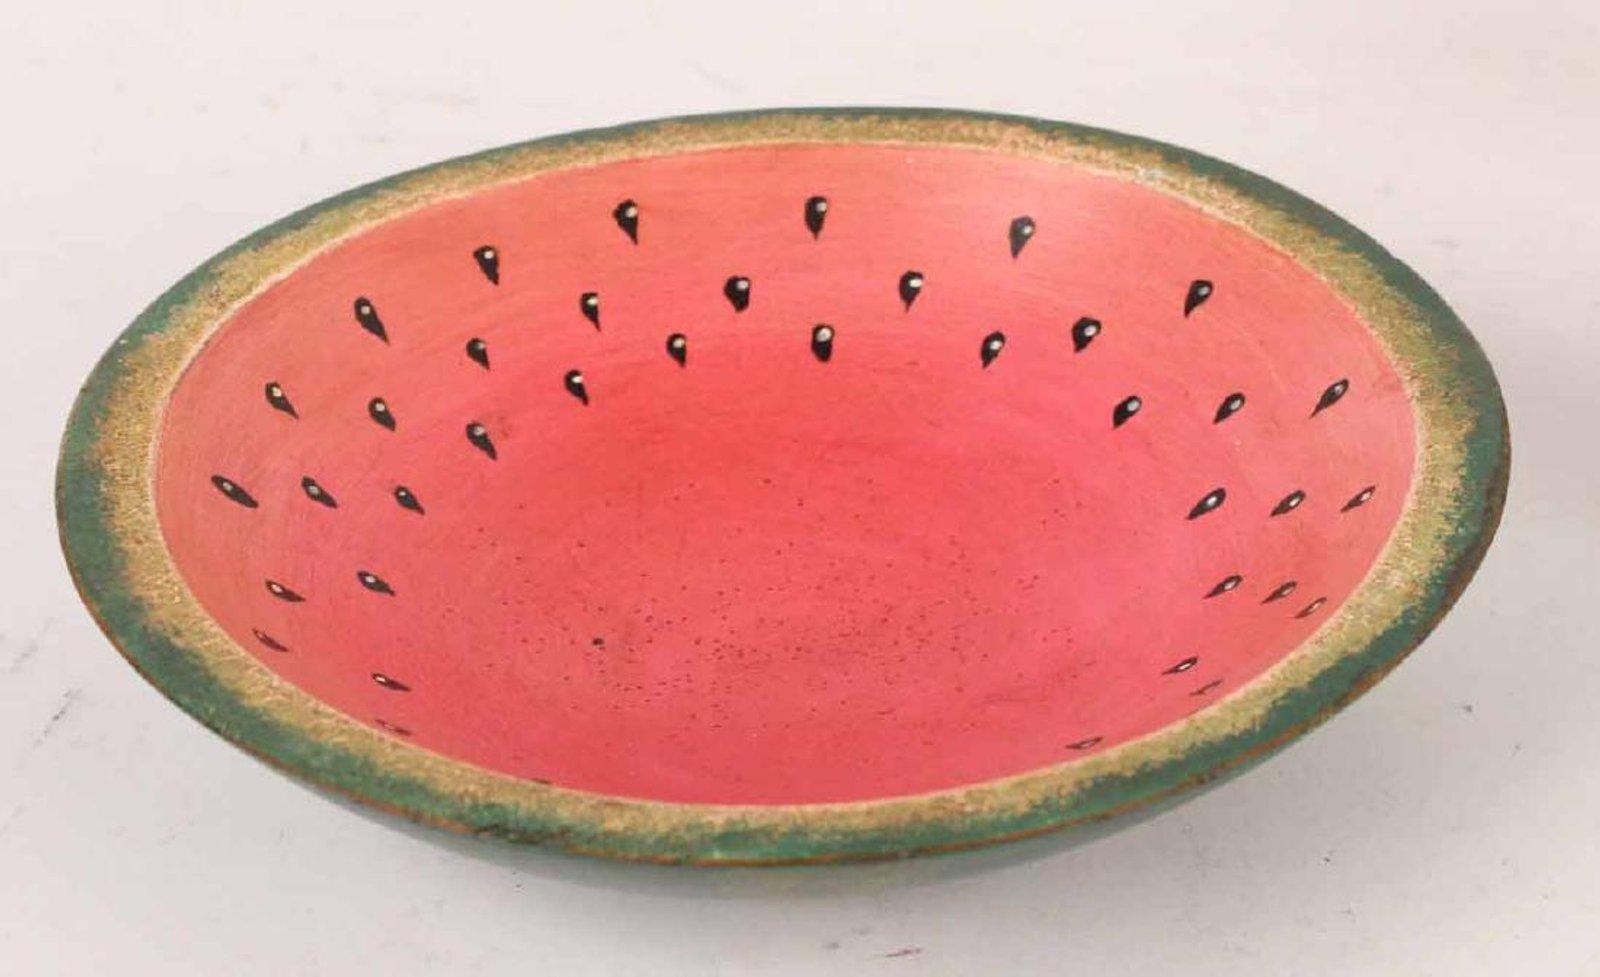 Trio of watermelon works for your pleasure. Includes a John Derian watermelon plate, a painted wood watermelon bowl, a stone watermelon slice. Watermelon: 9-1/2